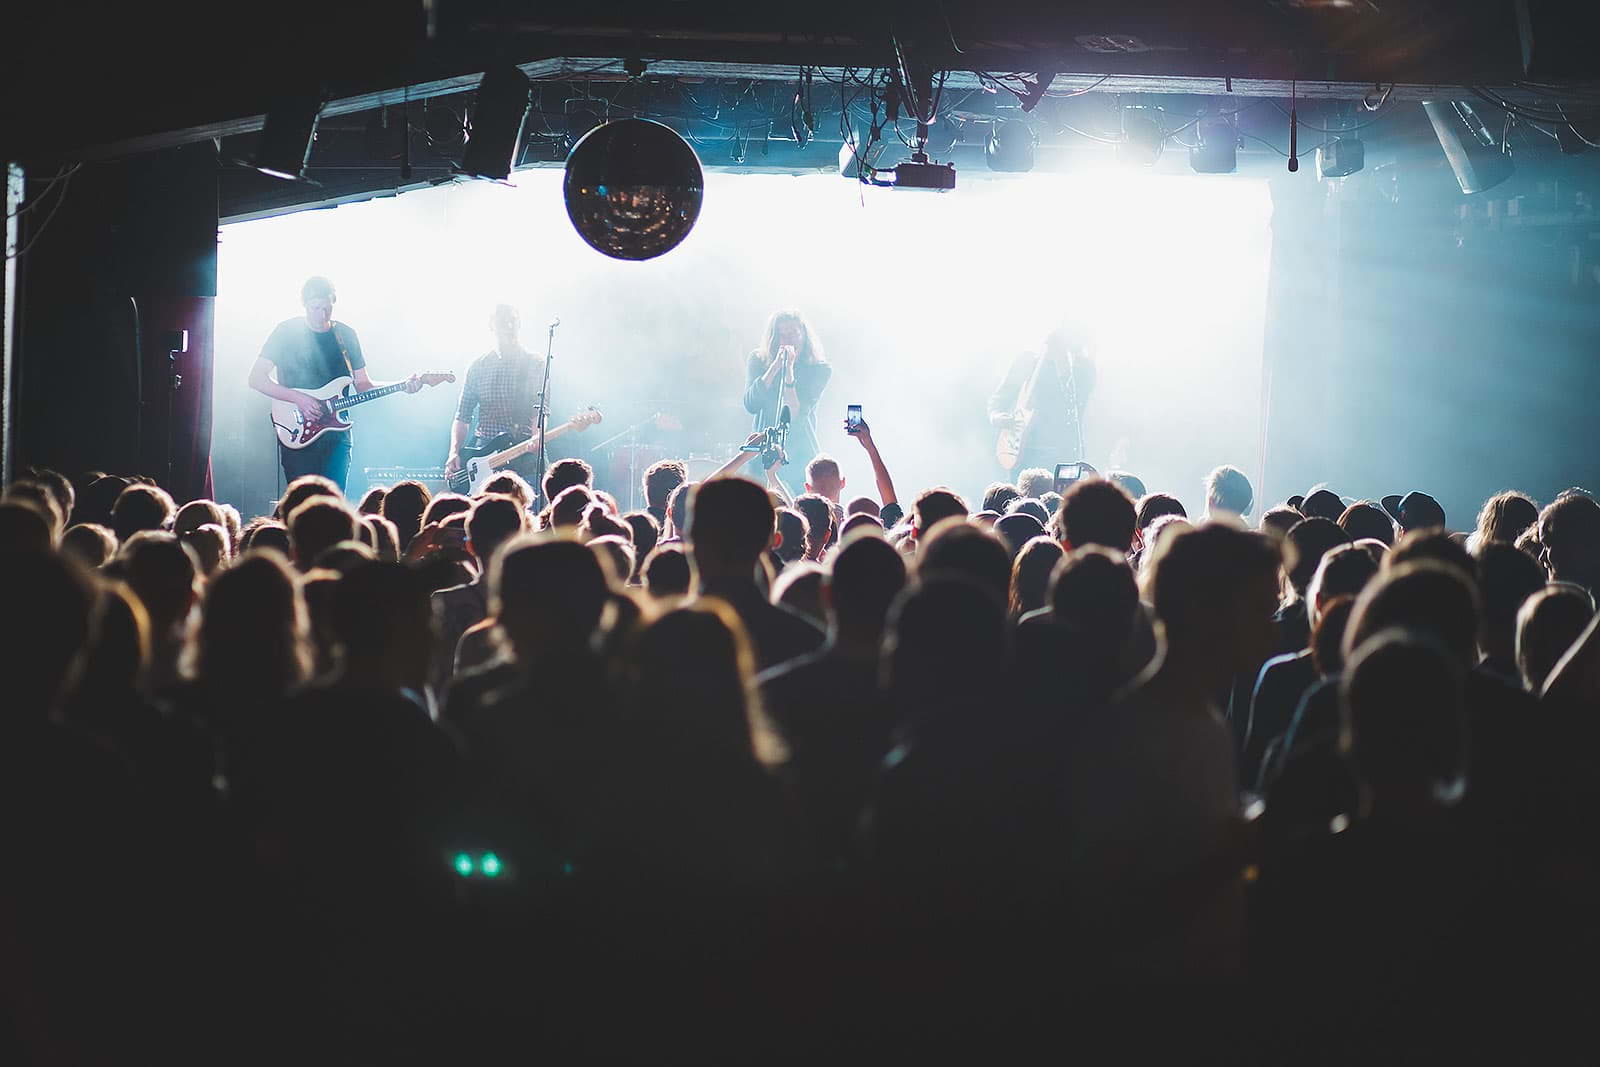 The best live music venues in London